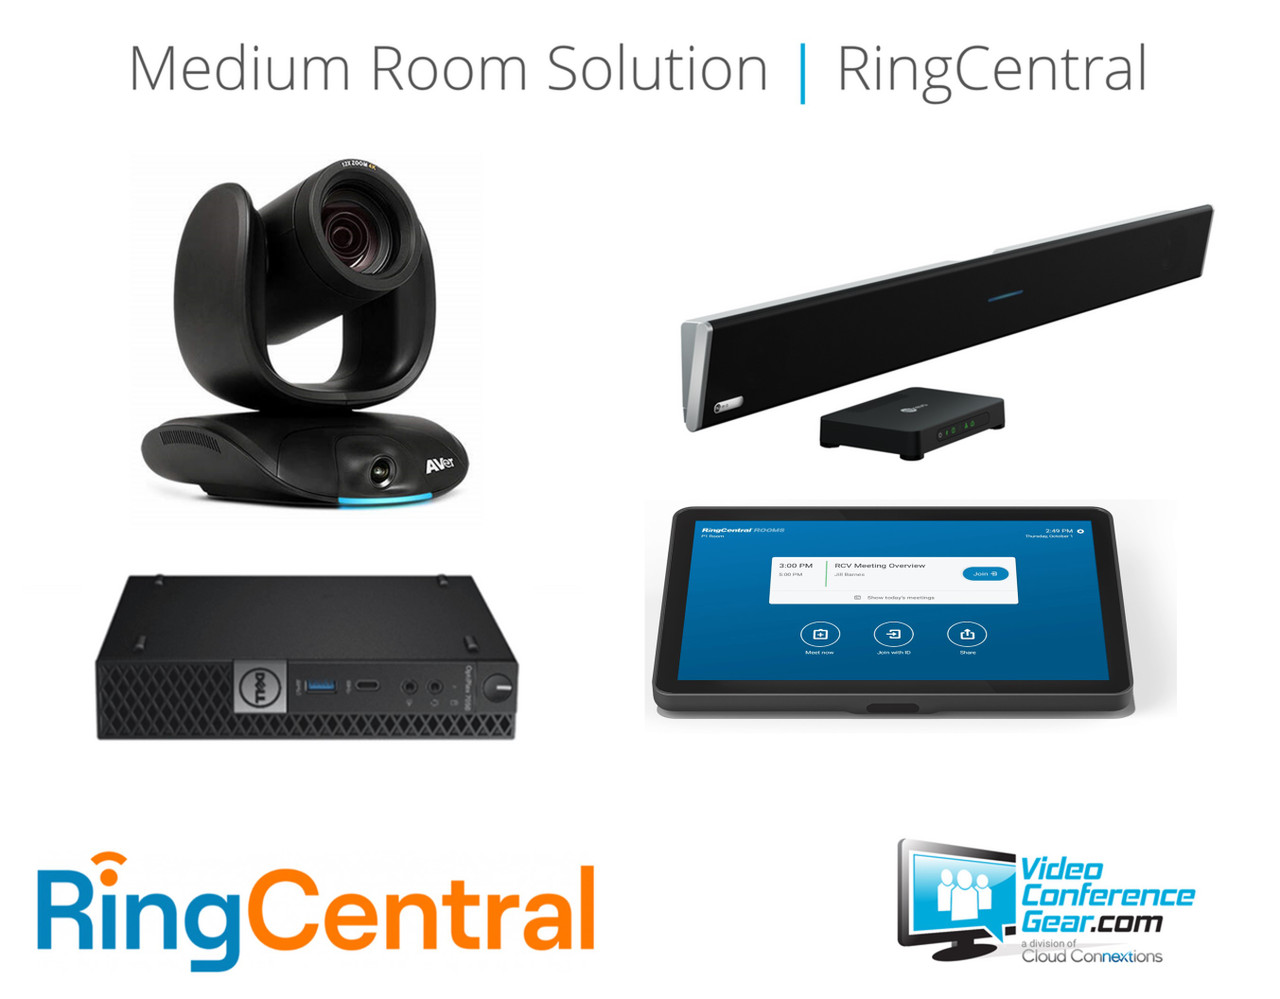 RingCentral Rooms Solution with AVer CAM550 and Nureva HDL310 - Medium Room